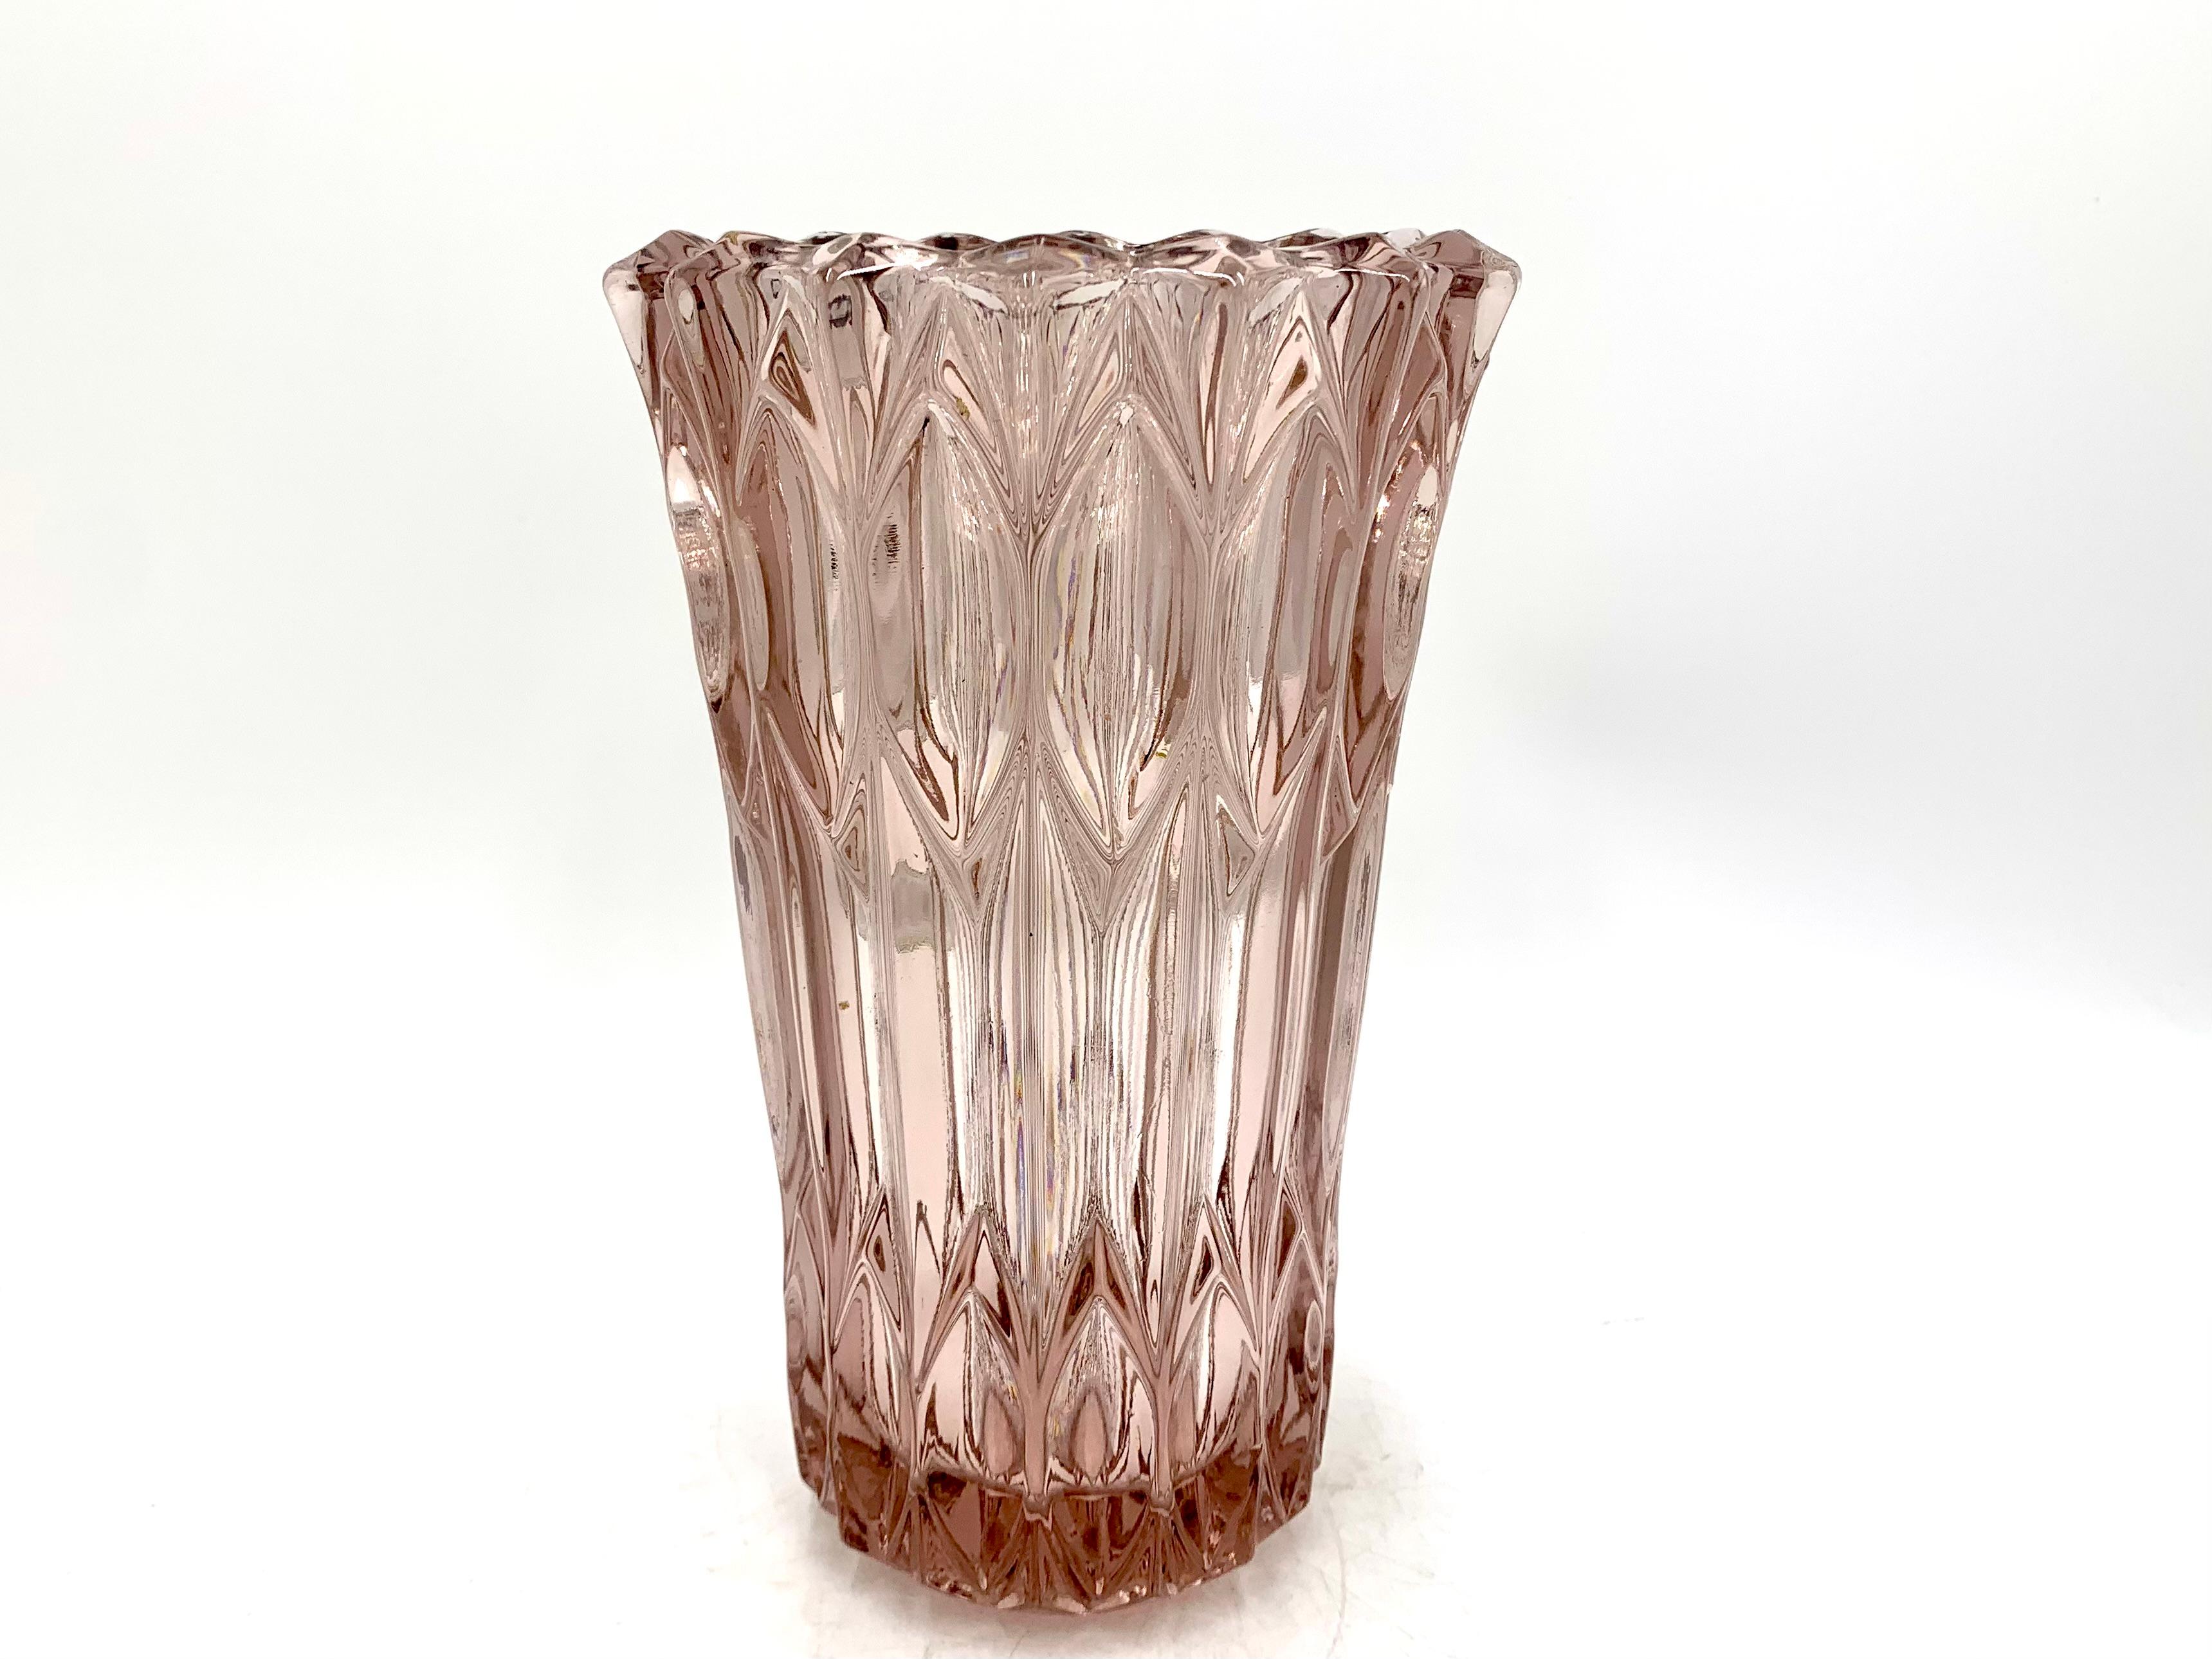 A large crystal vase in pink with an interesting shape.

Vase made in the Czech Republic in the 1950s.

Very good condition without damage

Measures: height 24 cm, diameter 15 cm.